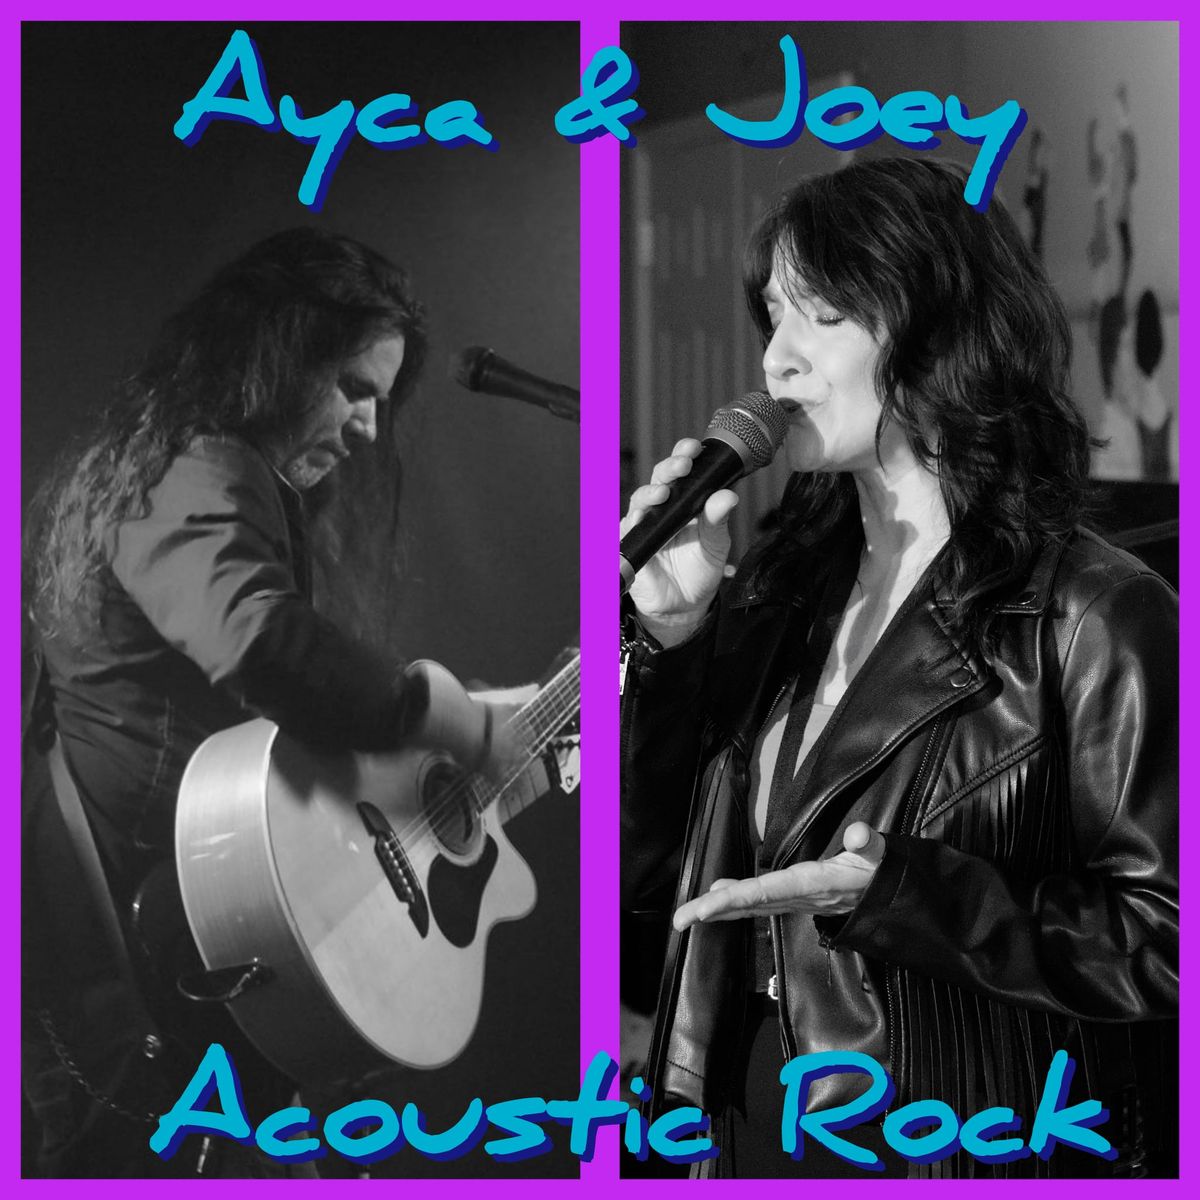 Ayca & Joey Acoustic Rock @ The Kennedy (Old Blackhorse Brewery on Gay St.)